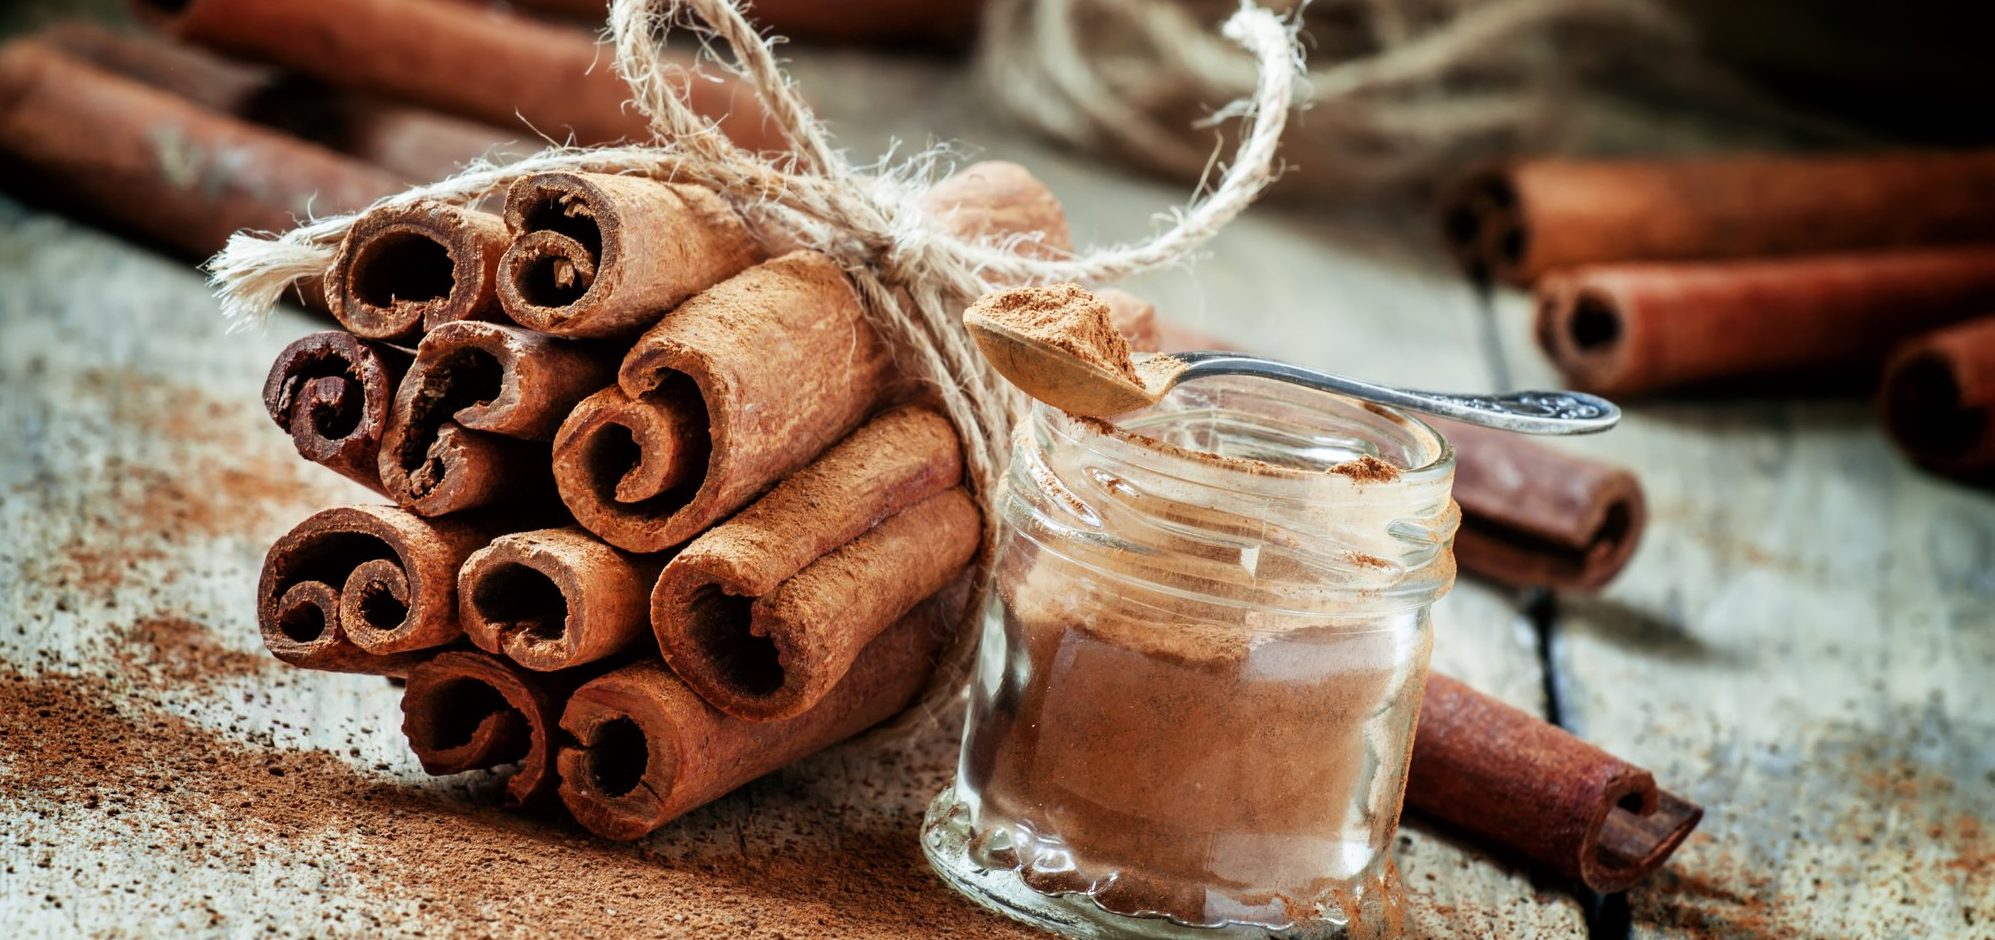 Burning cinnamon for money: how to attract prosperity - WeMystic